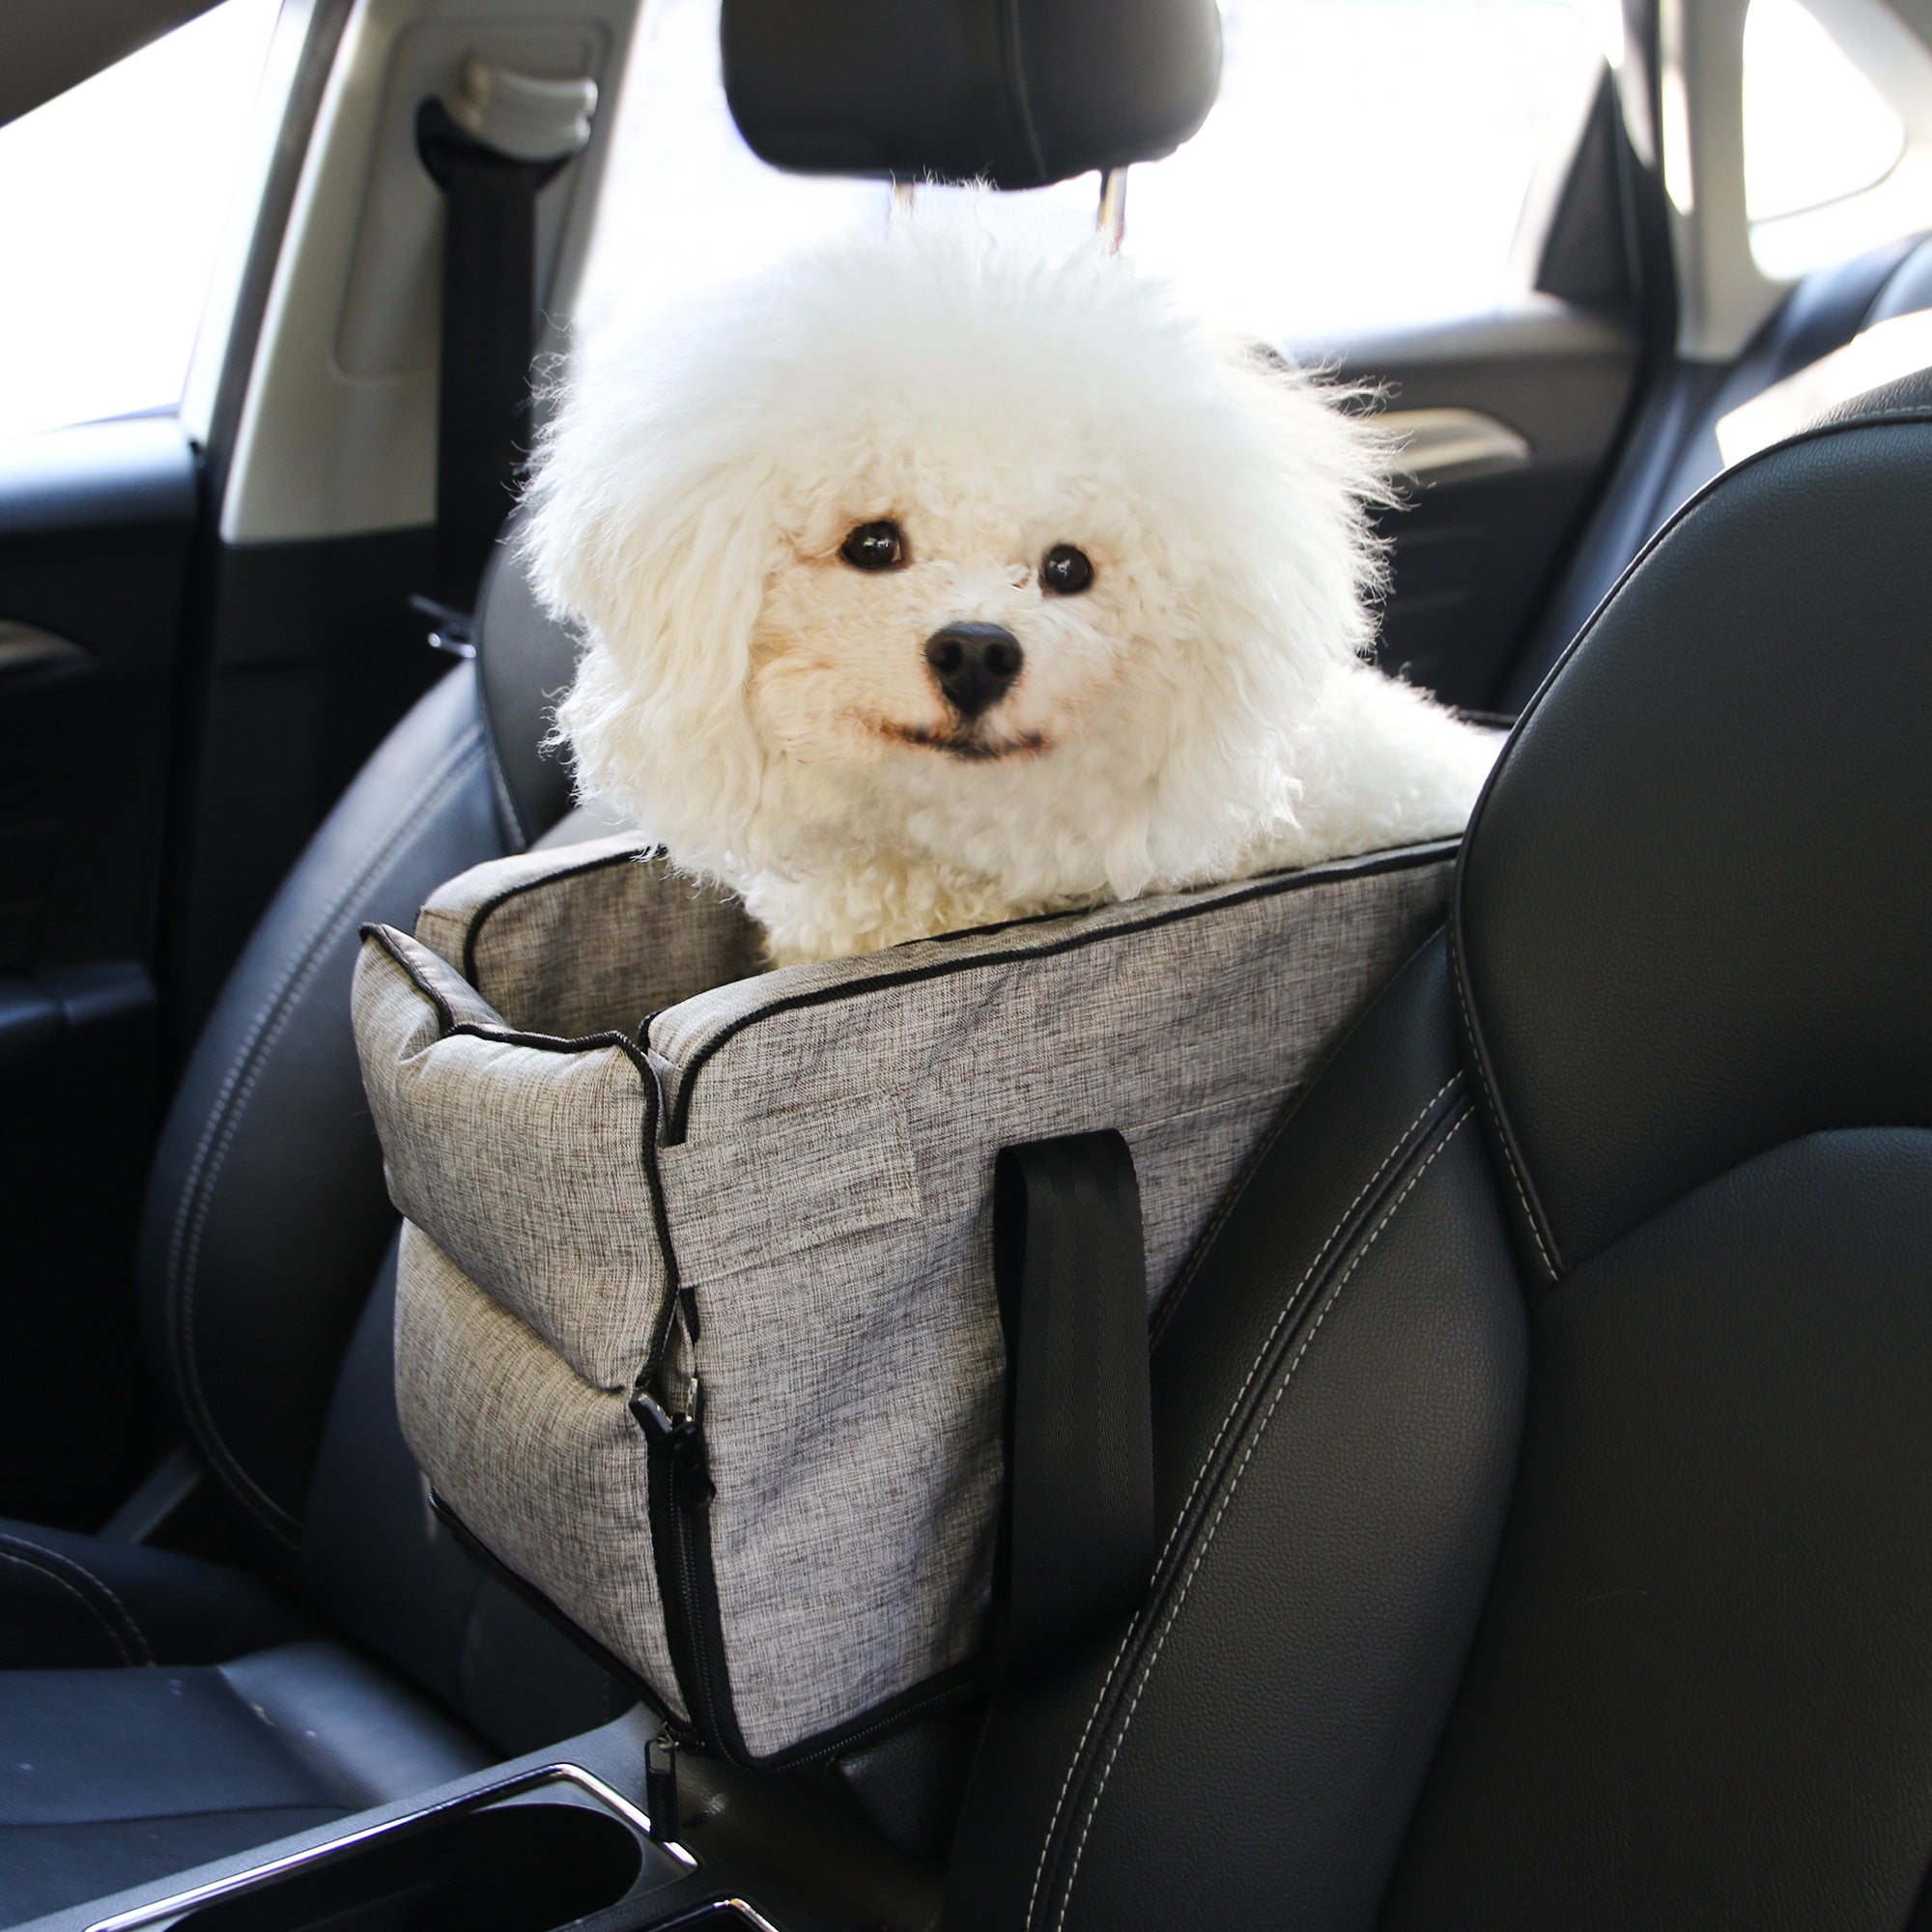 Dog Console Car Seat Pet Dog Car Seat on Console Armrest Dog Cat Booster Seat on Car Armrest Travel Bag for Small Dogs Cat